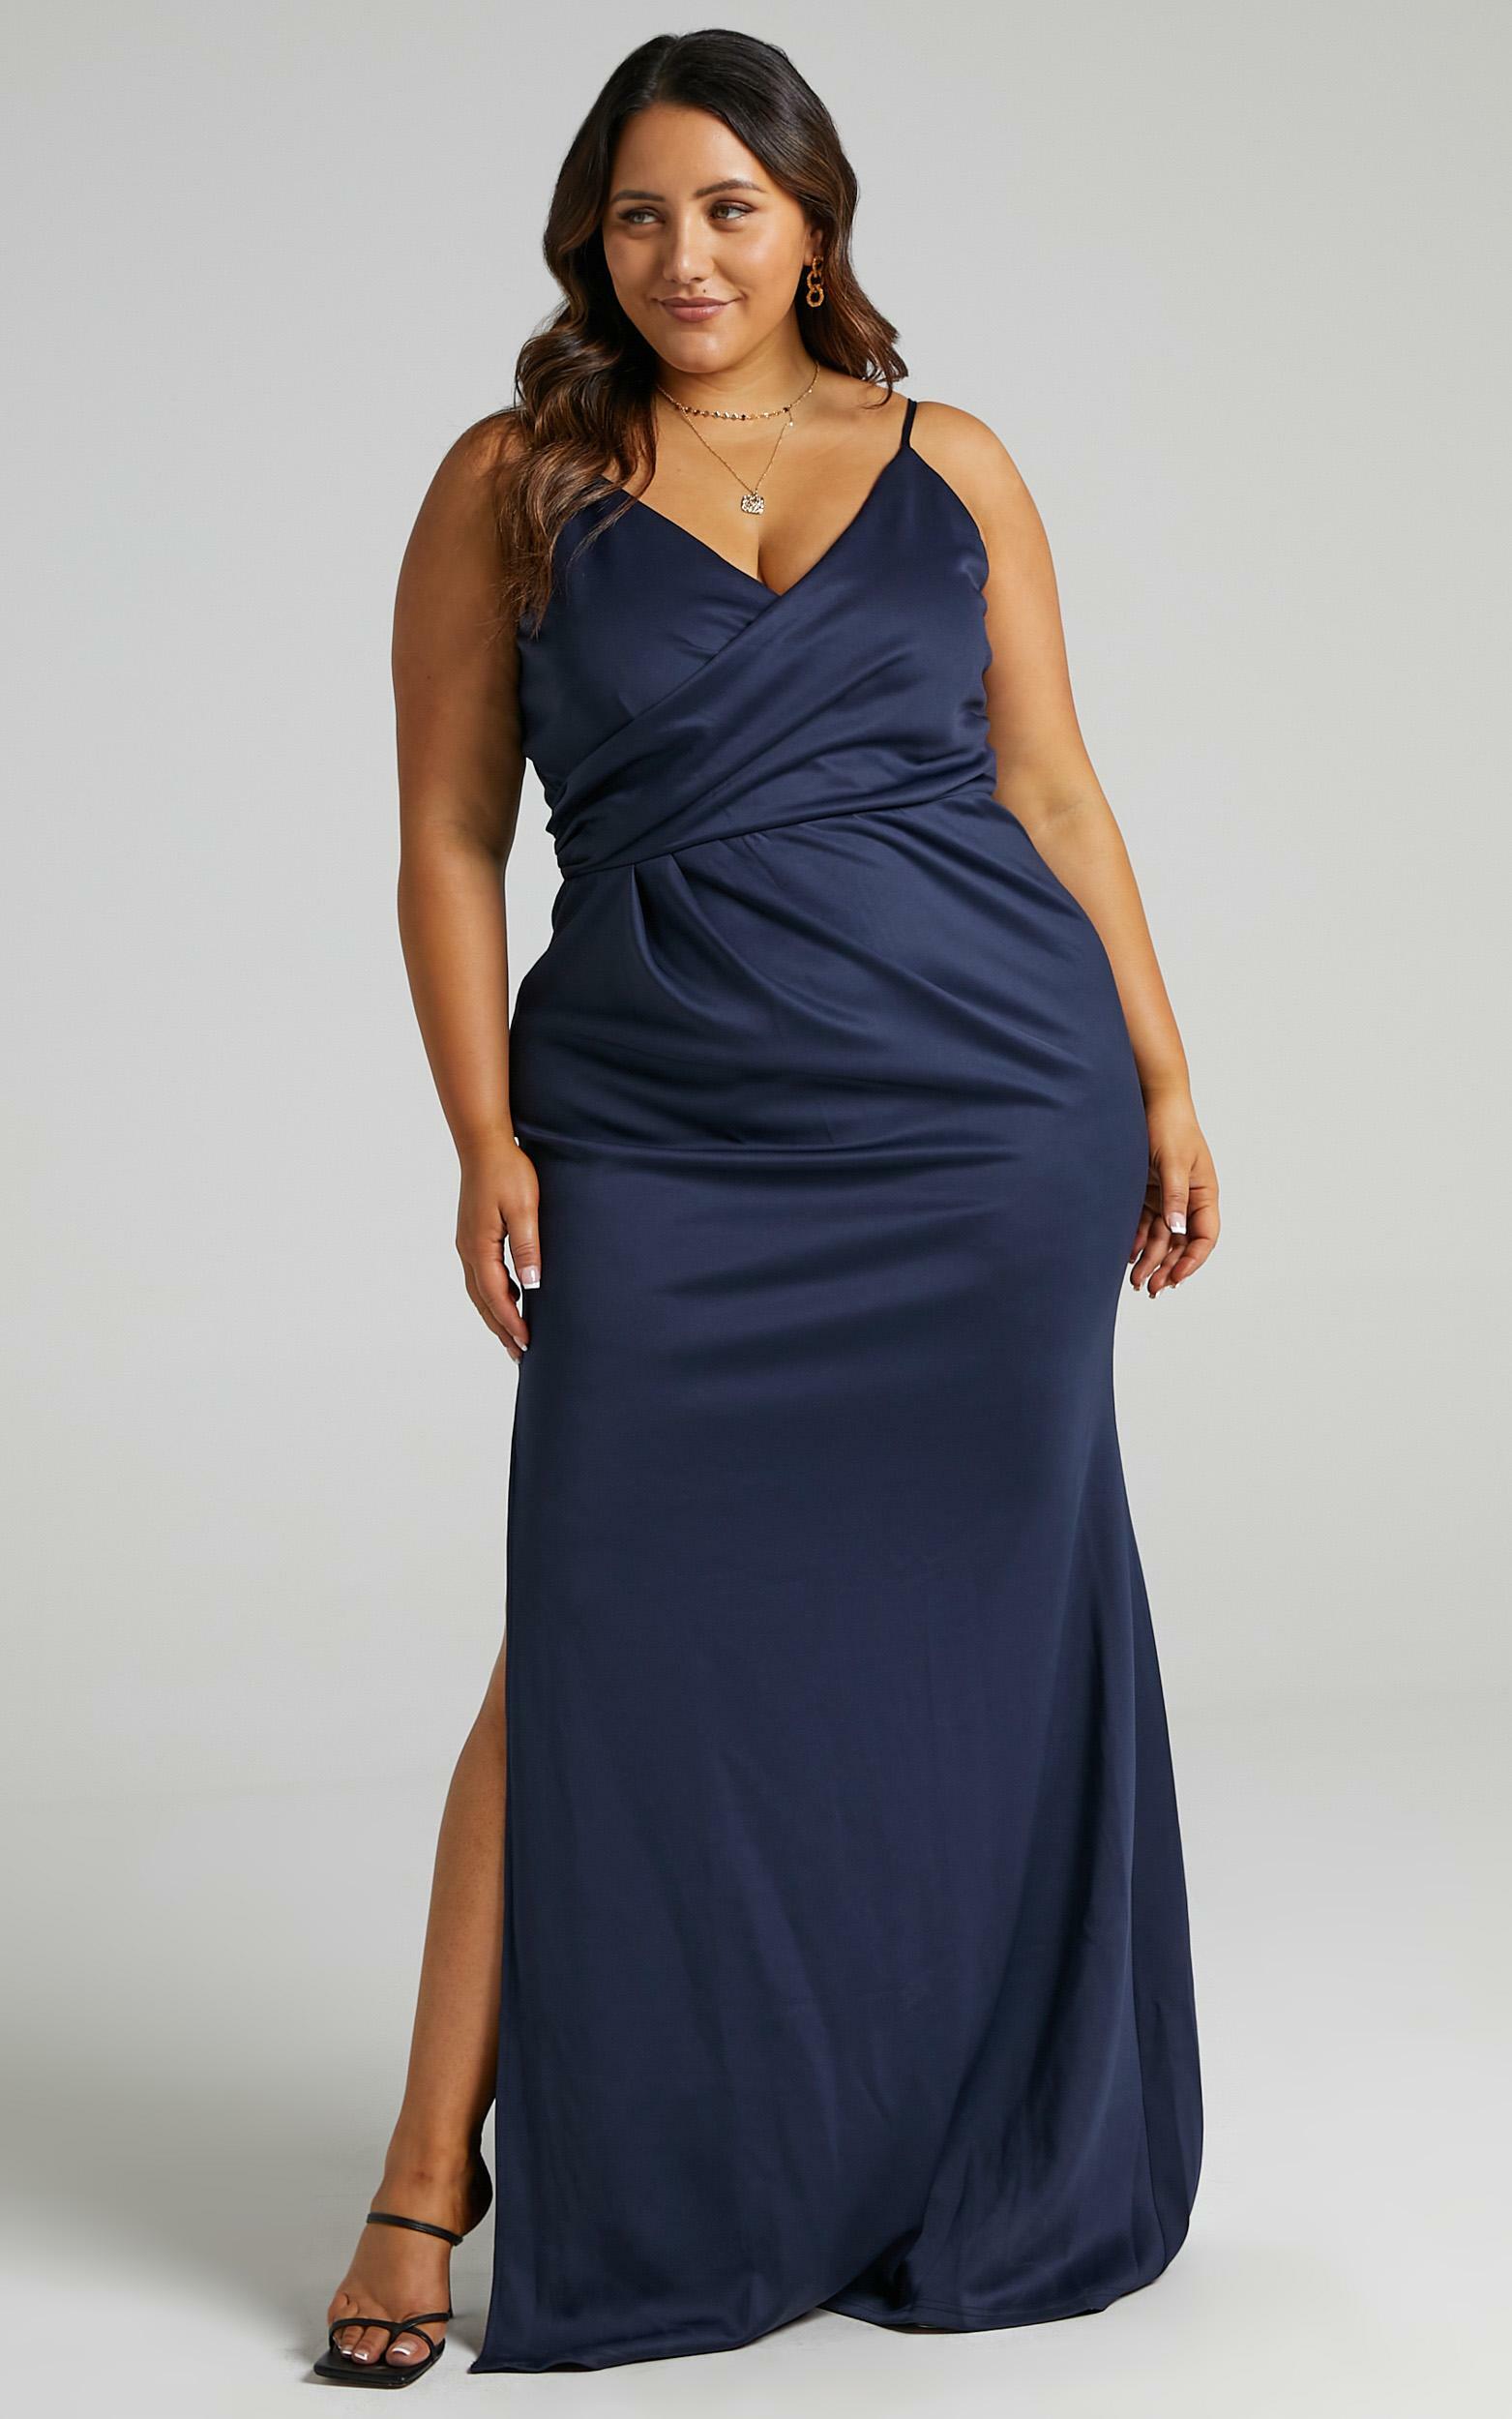 Linking Love Slip Maxi Dress in Navy - 04, NVY2, hi-res image number null